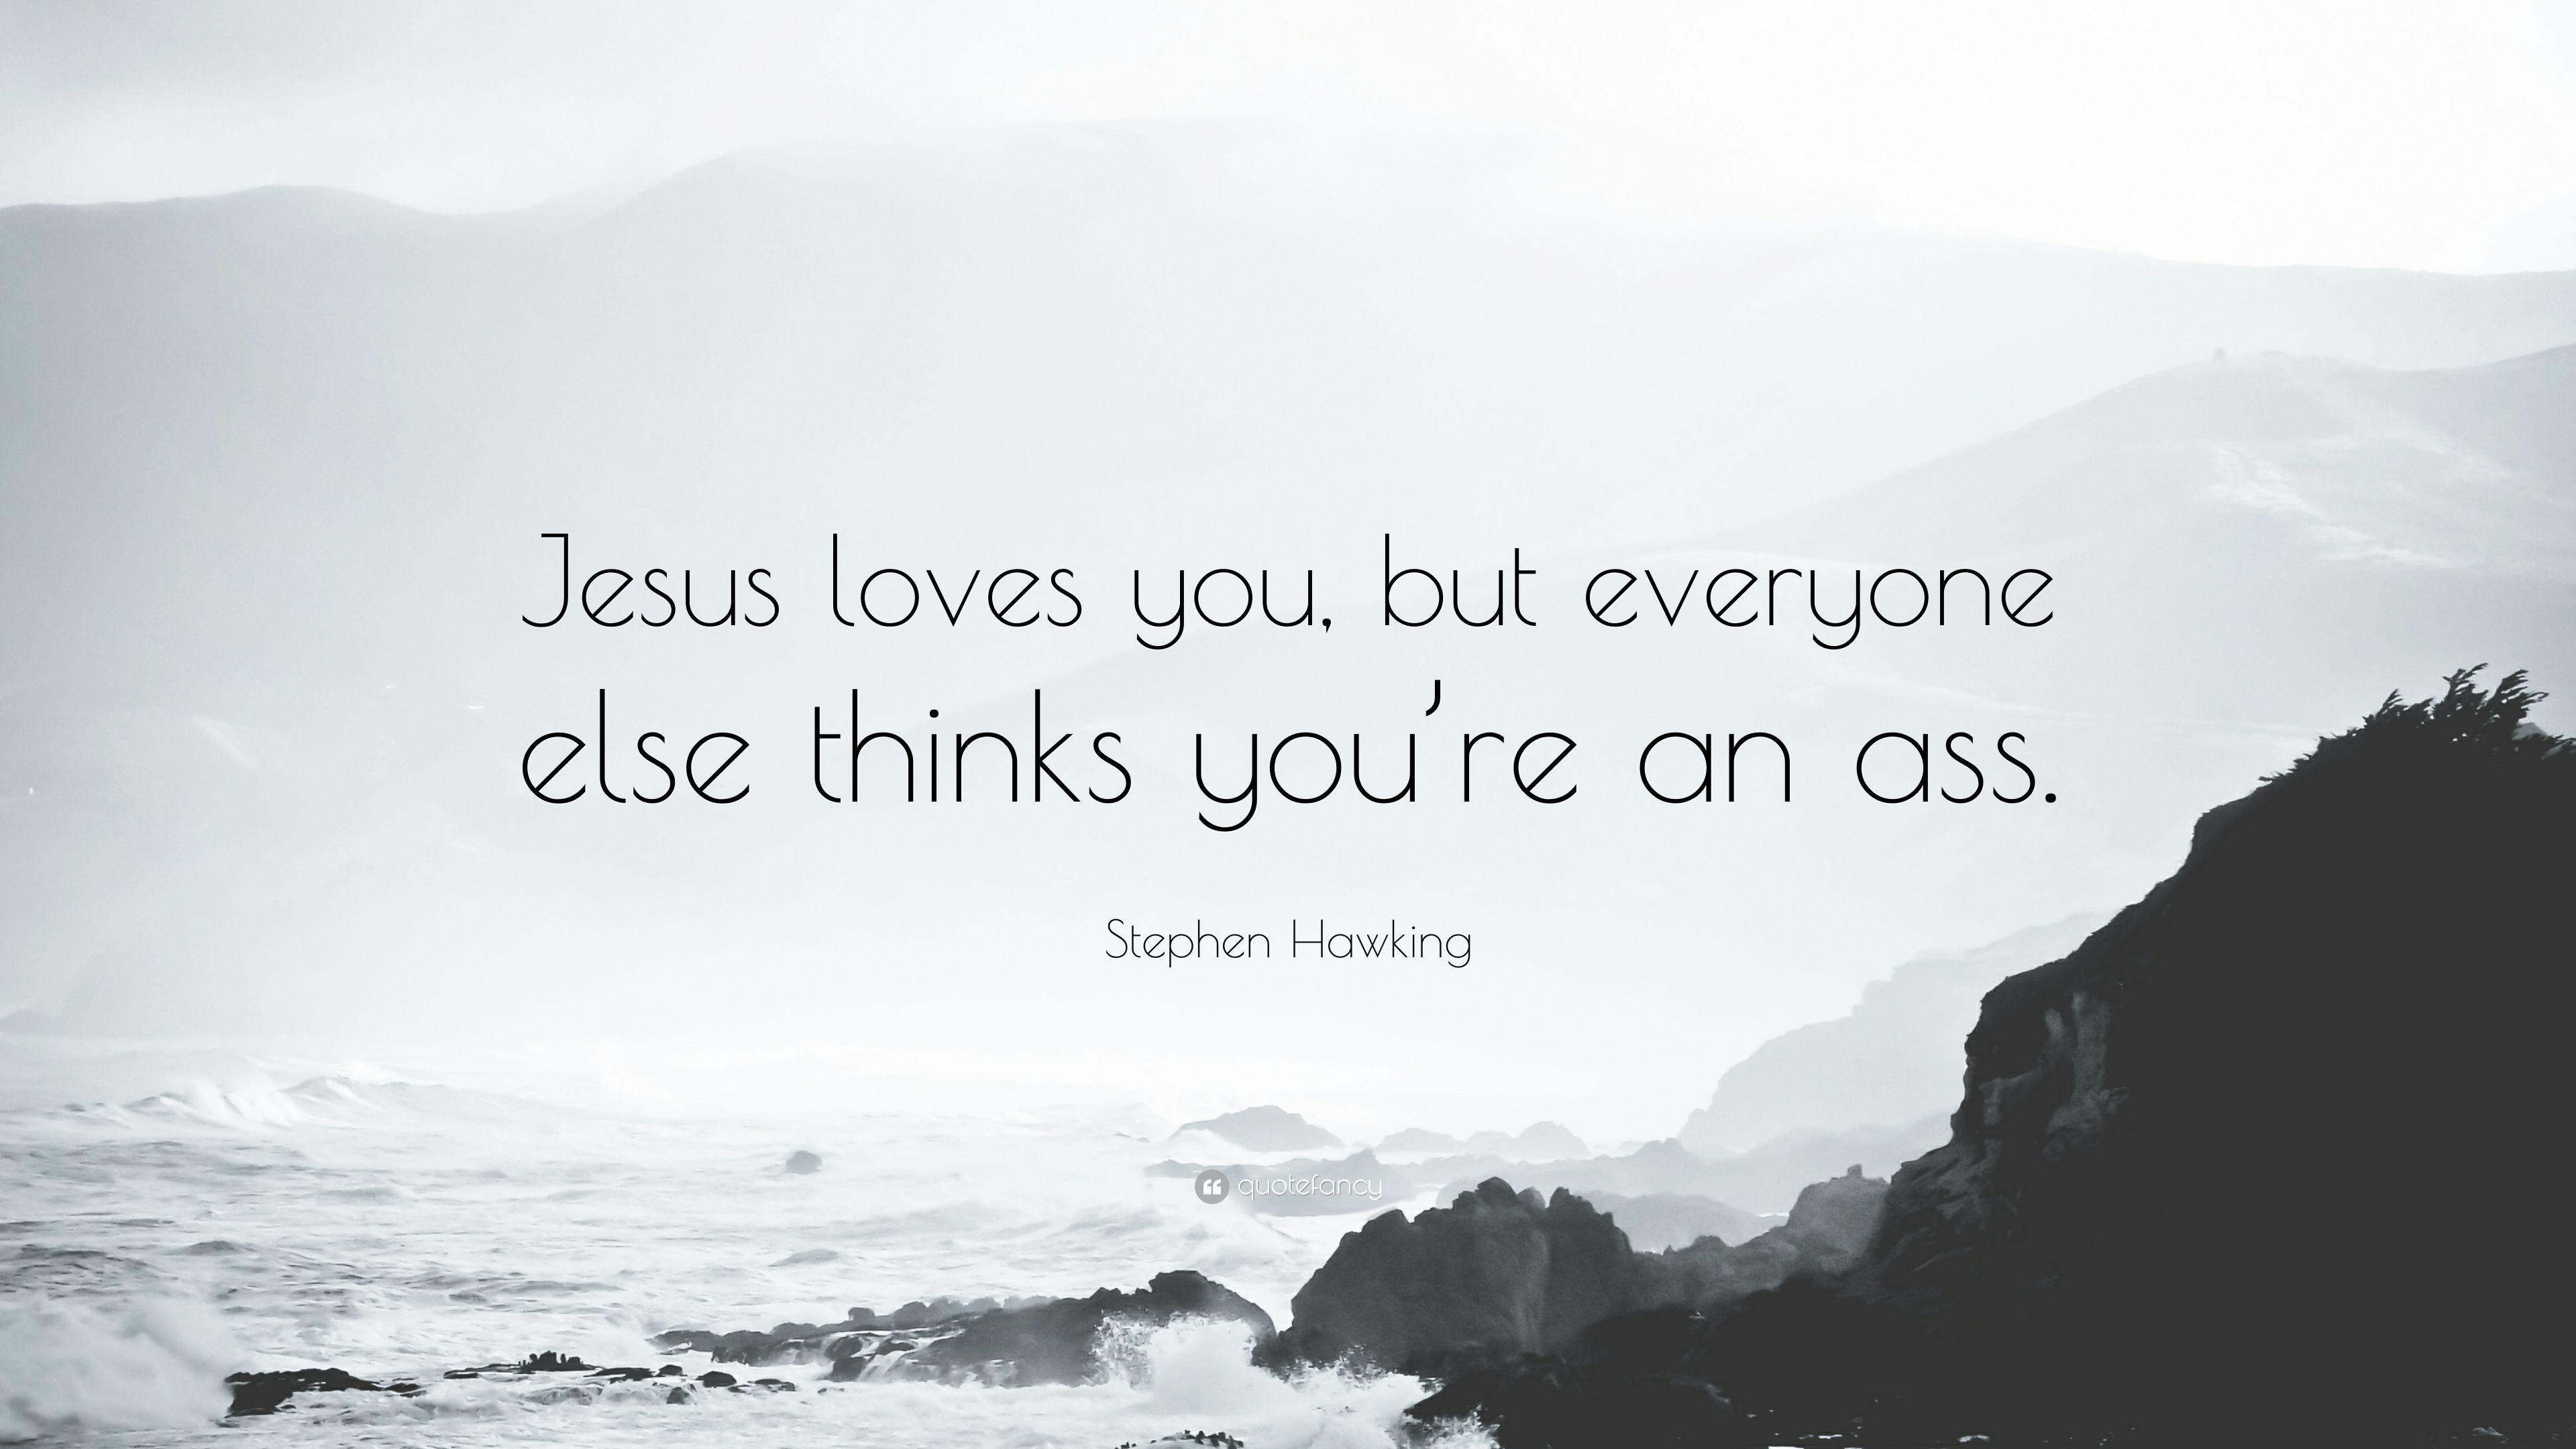 Stephen Hawking Quote: “Jesus loves you, but everyone else thinks